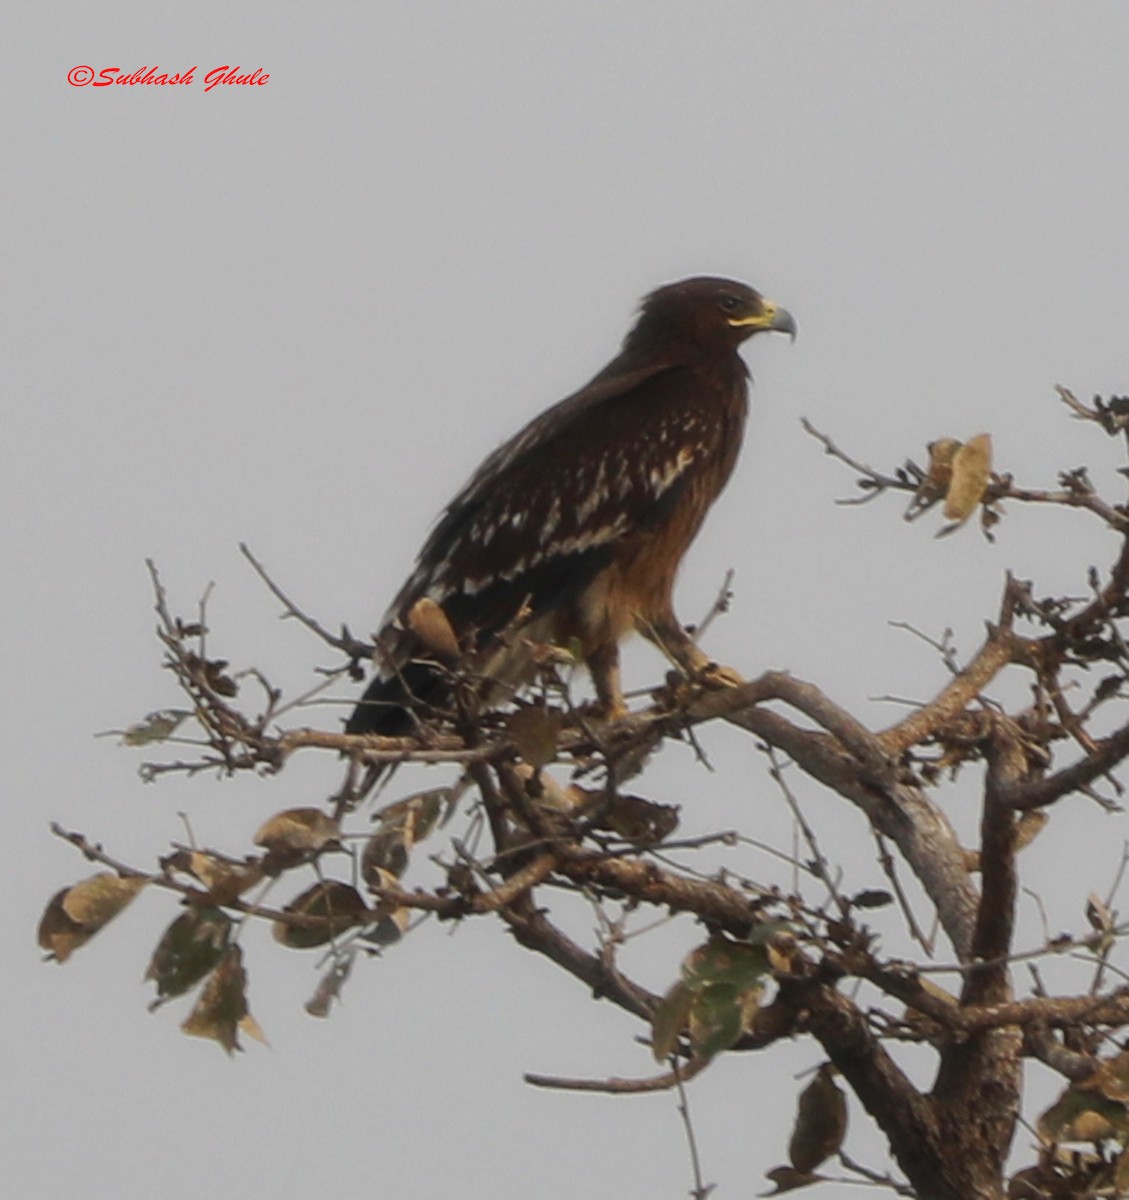 Greater Spotted Eagle - SUBHASH GHULE